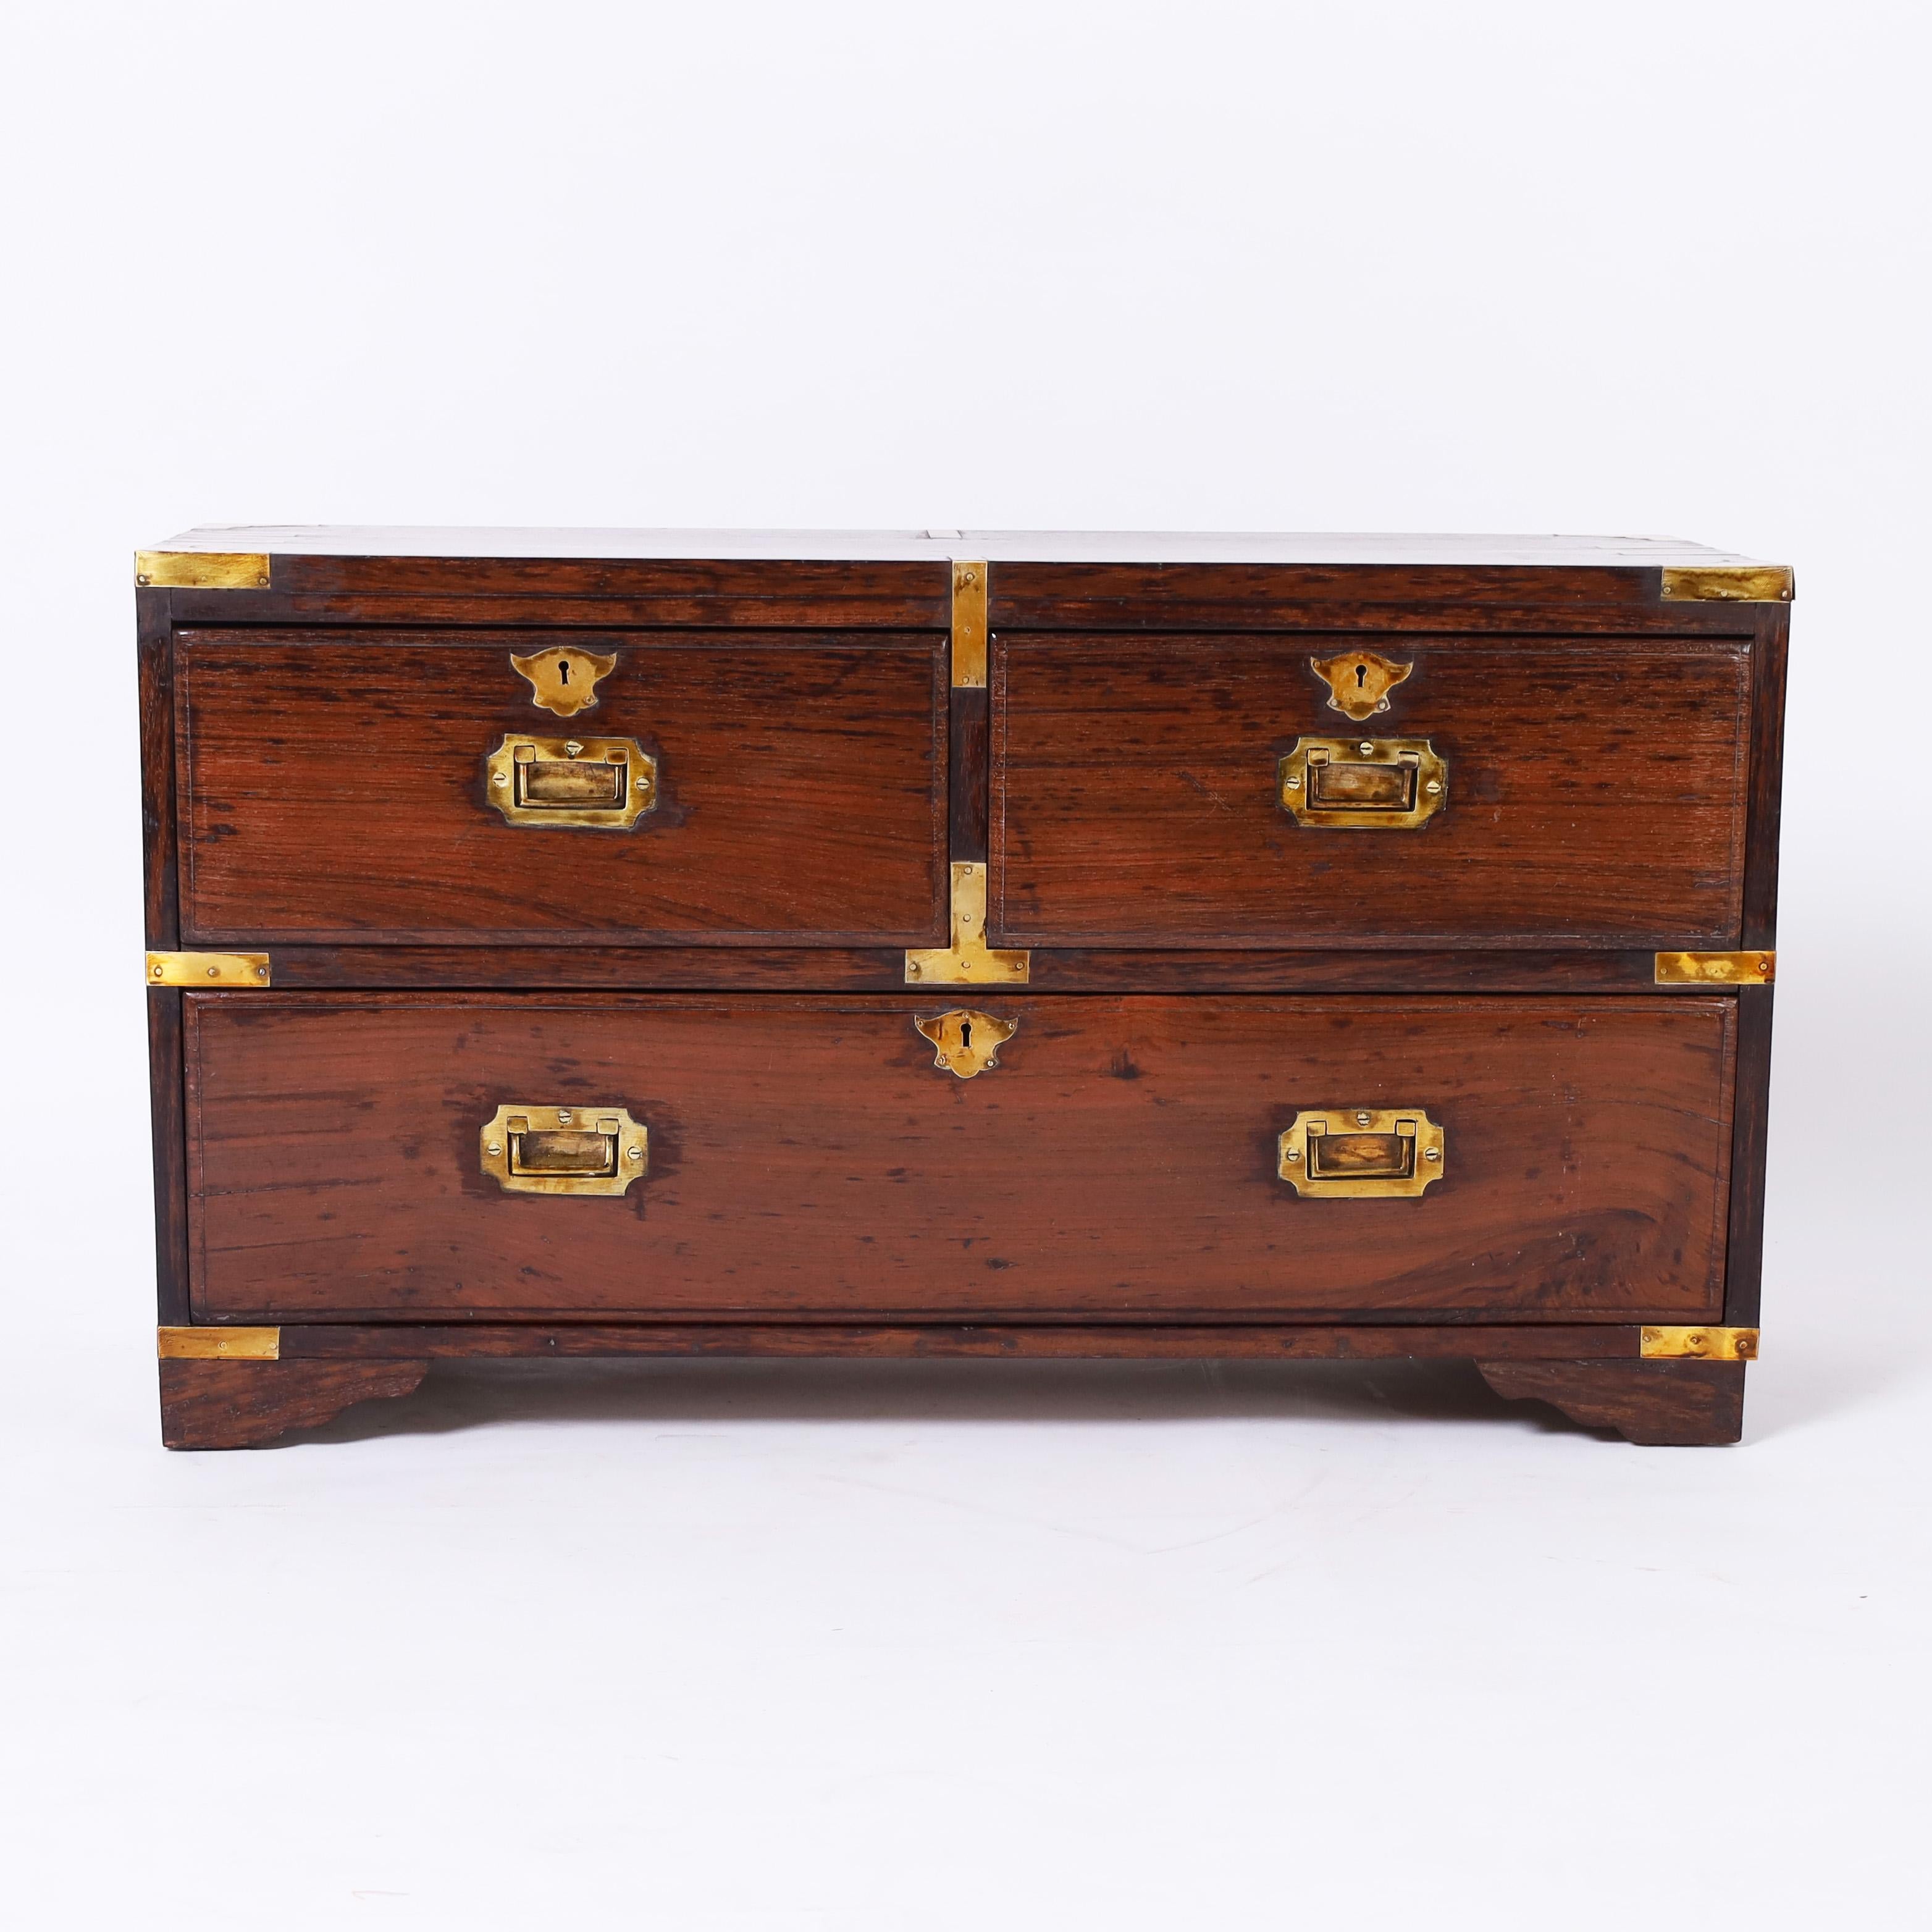 Handsome 19th century English campaign chest handcrafted with rosewood in an unusual form with three drawers, brass hardware, and bracket feet.